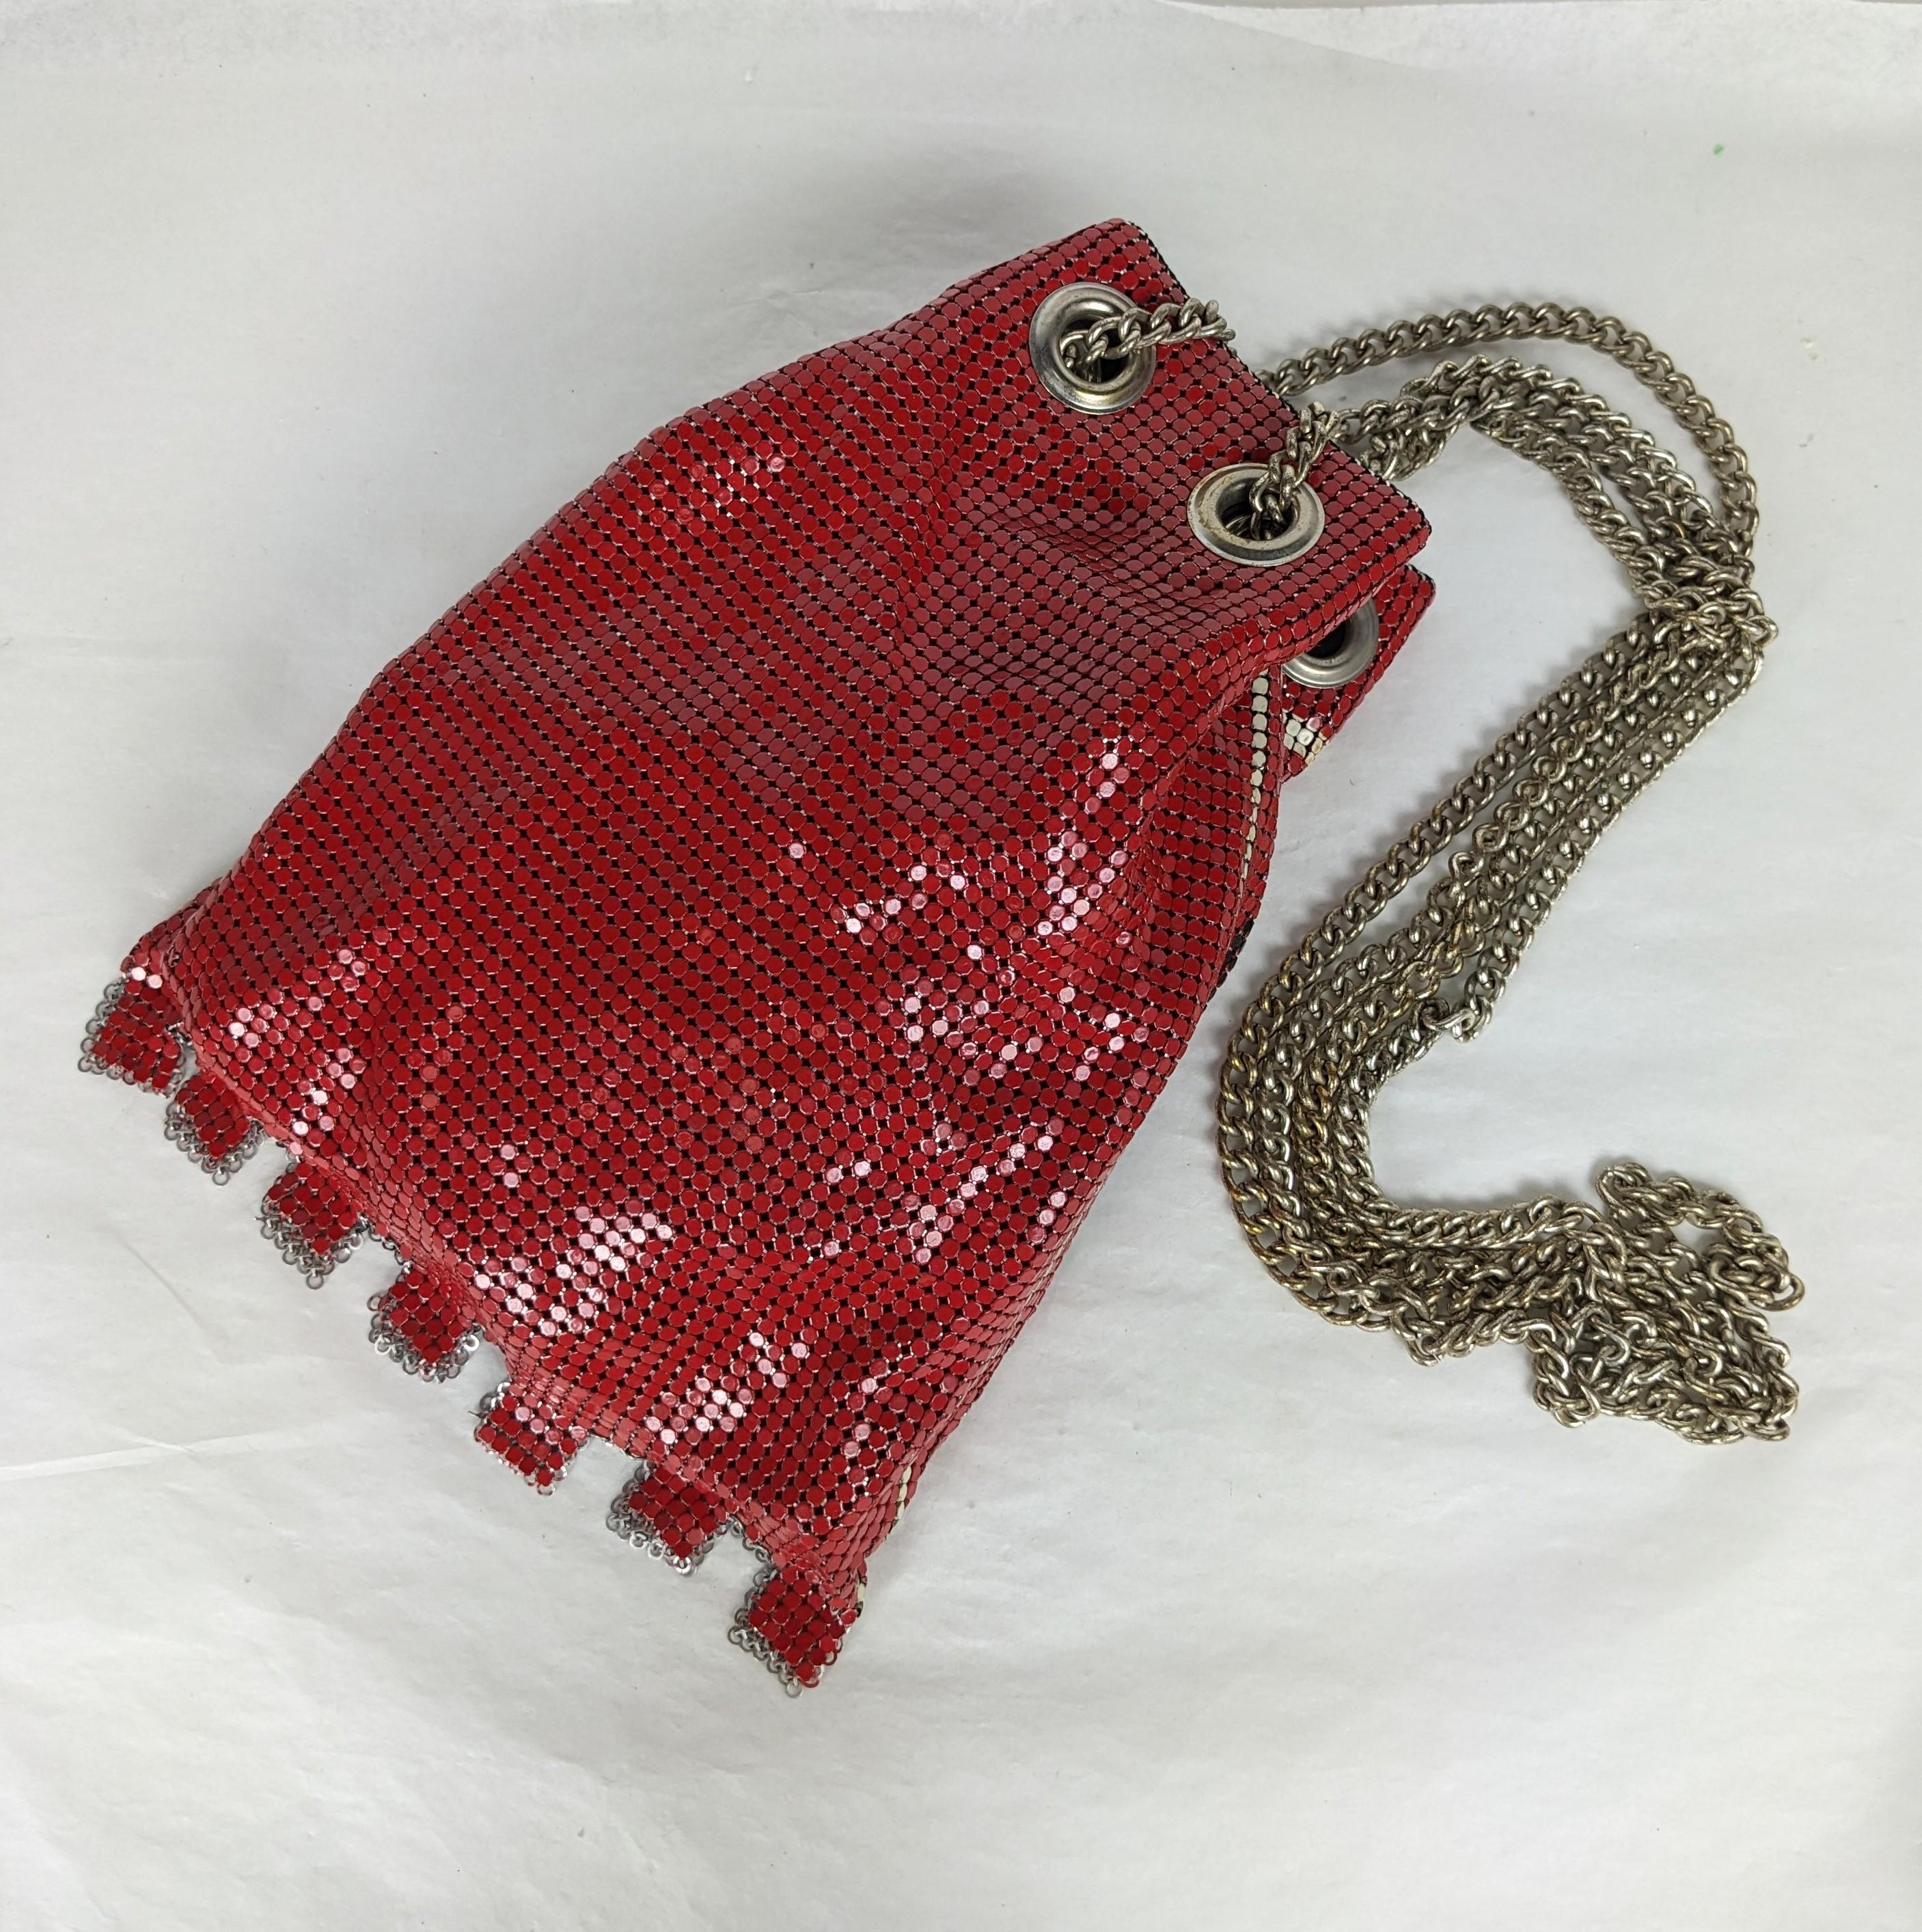 Enamel Metal Mesh Shoulder Bag In Good Condition For Sale In New York, NY